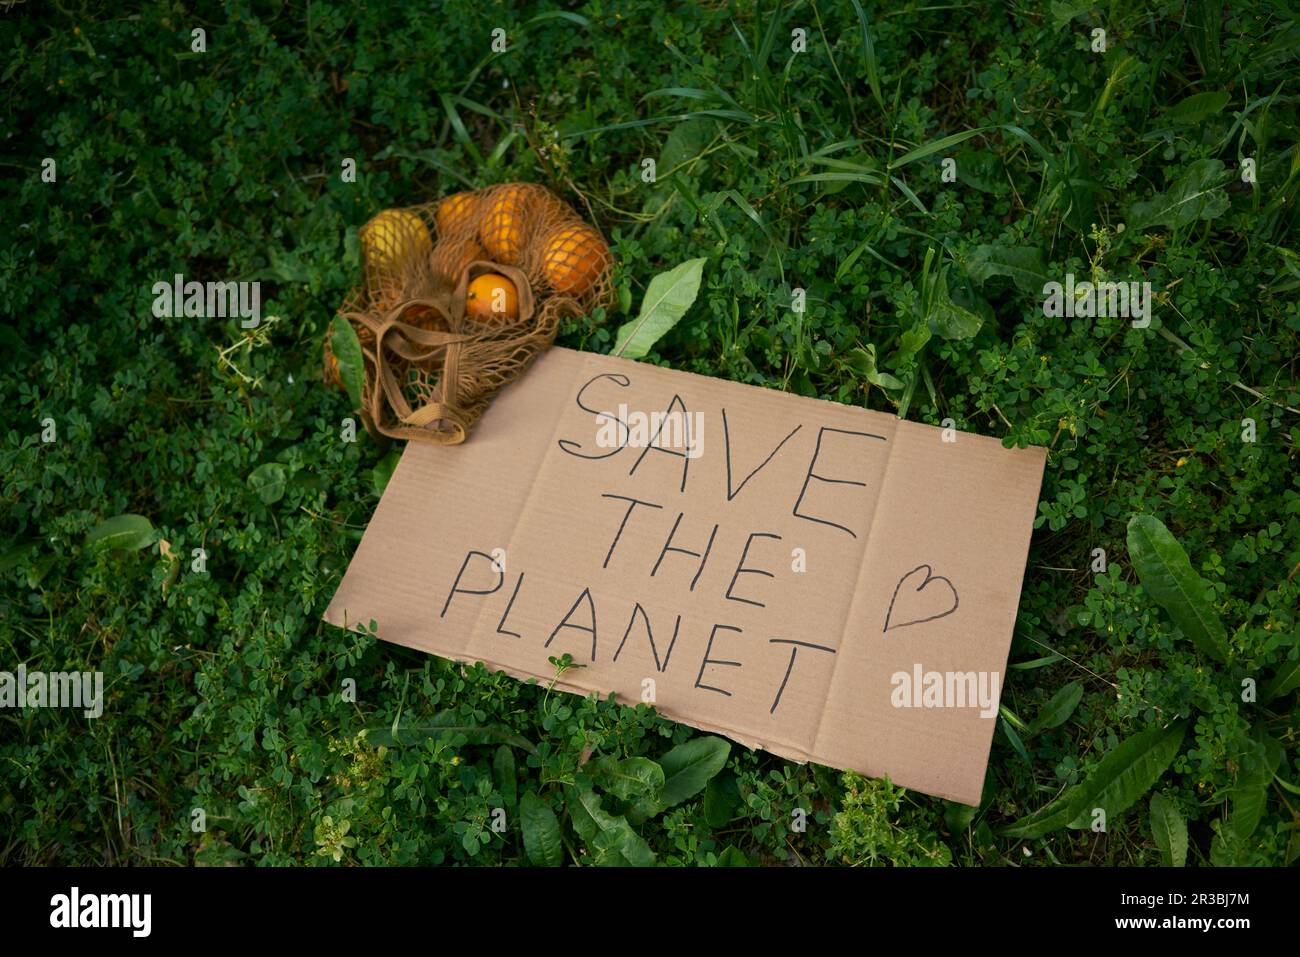 Mesh bag with oranges by Save The Planet text on cardboard cut out Stock Photo